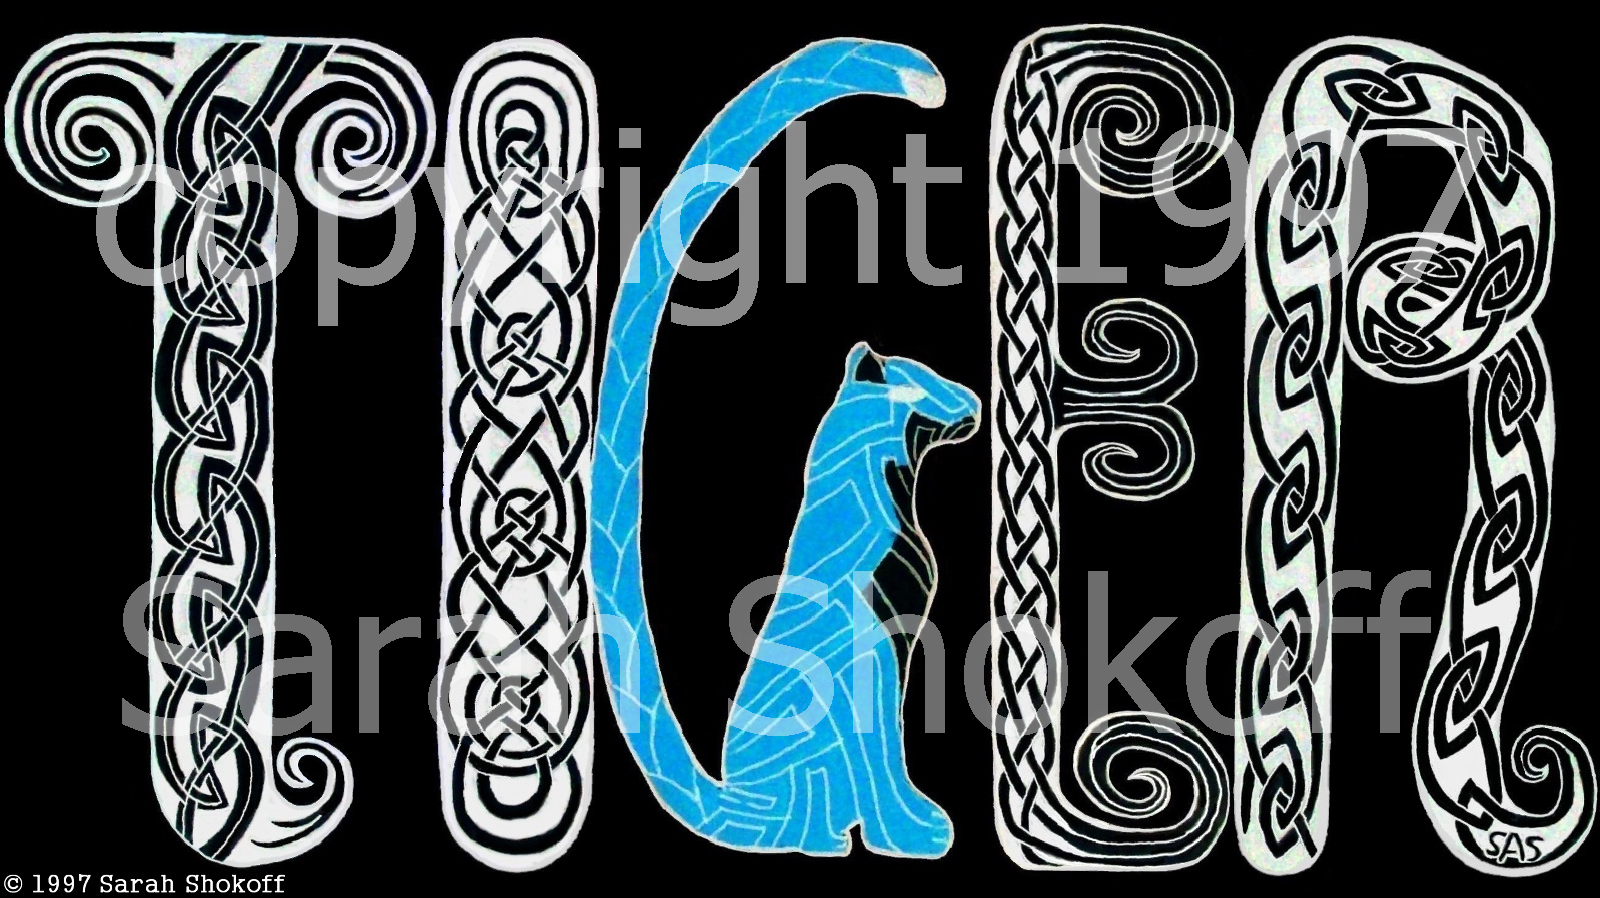 the word tiger is made up of 4 differnt kinds of Celtic knotwork in black and white and a blue tiger